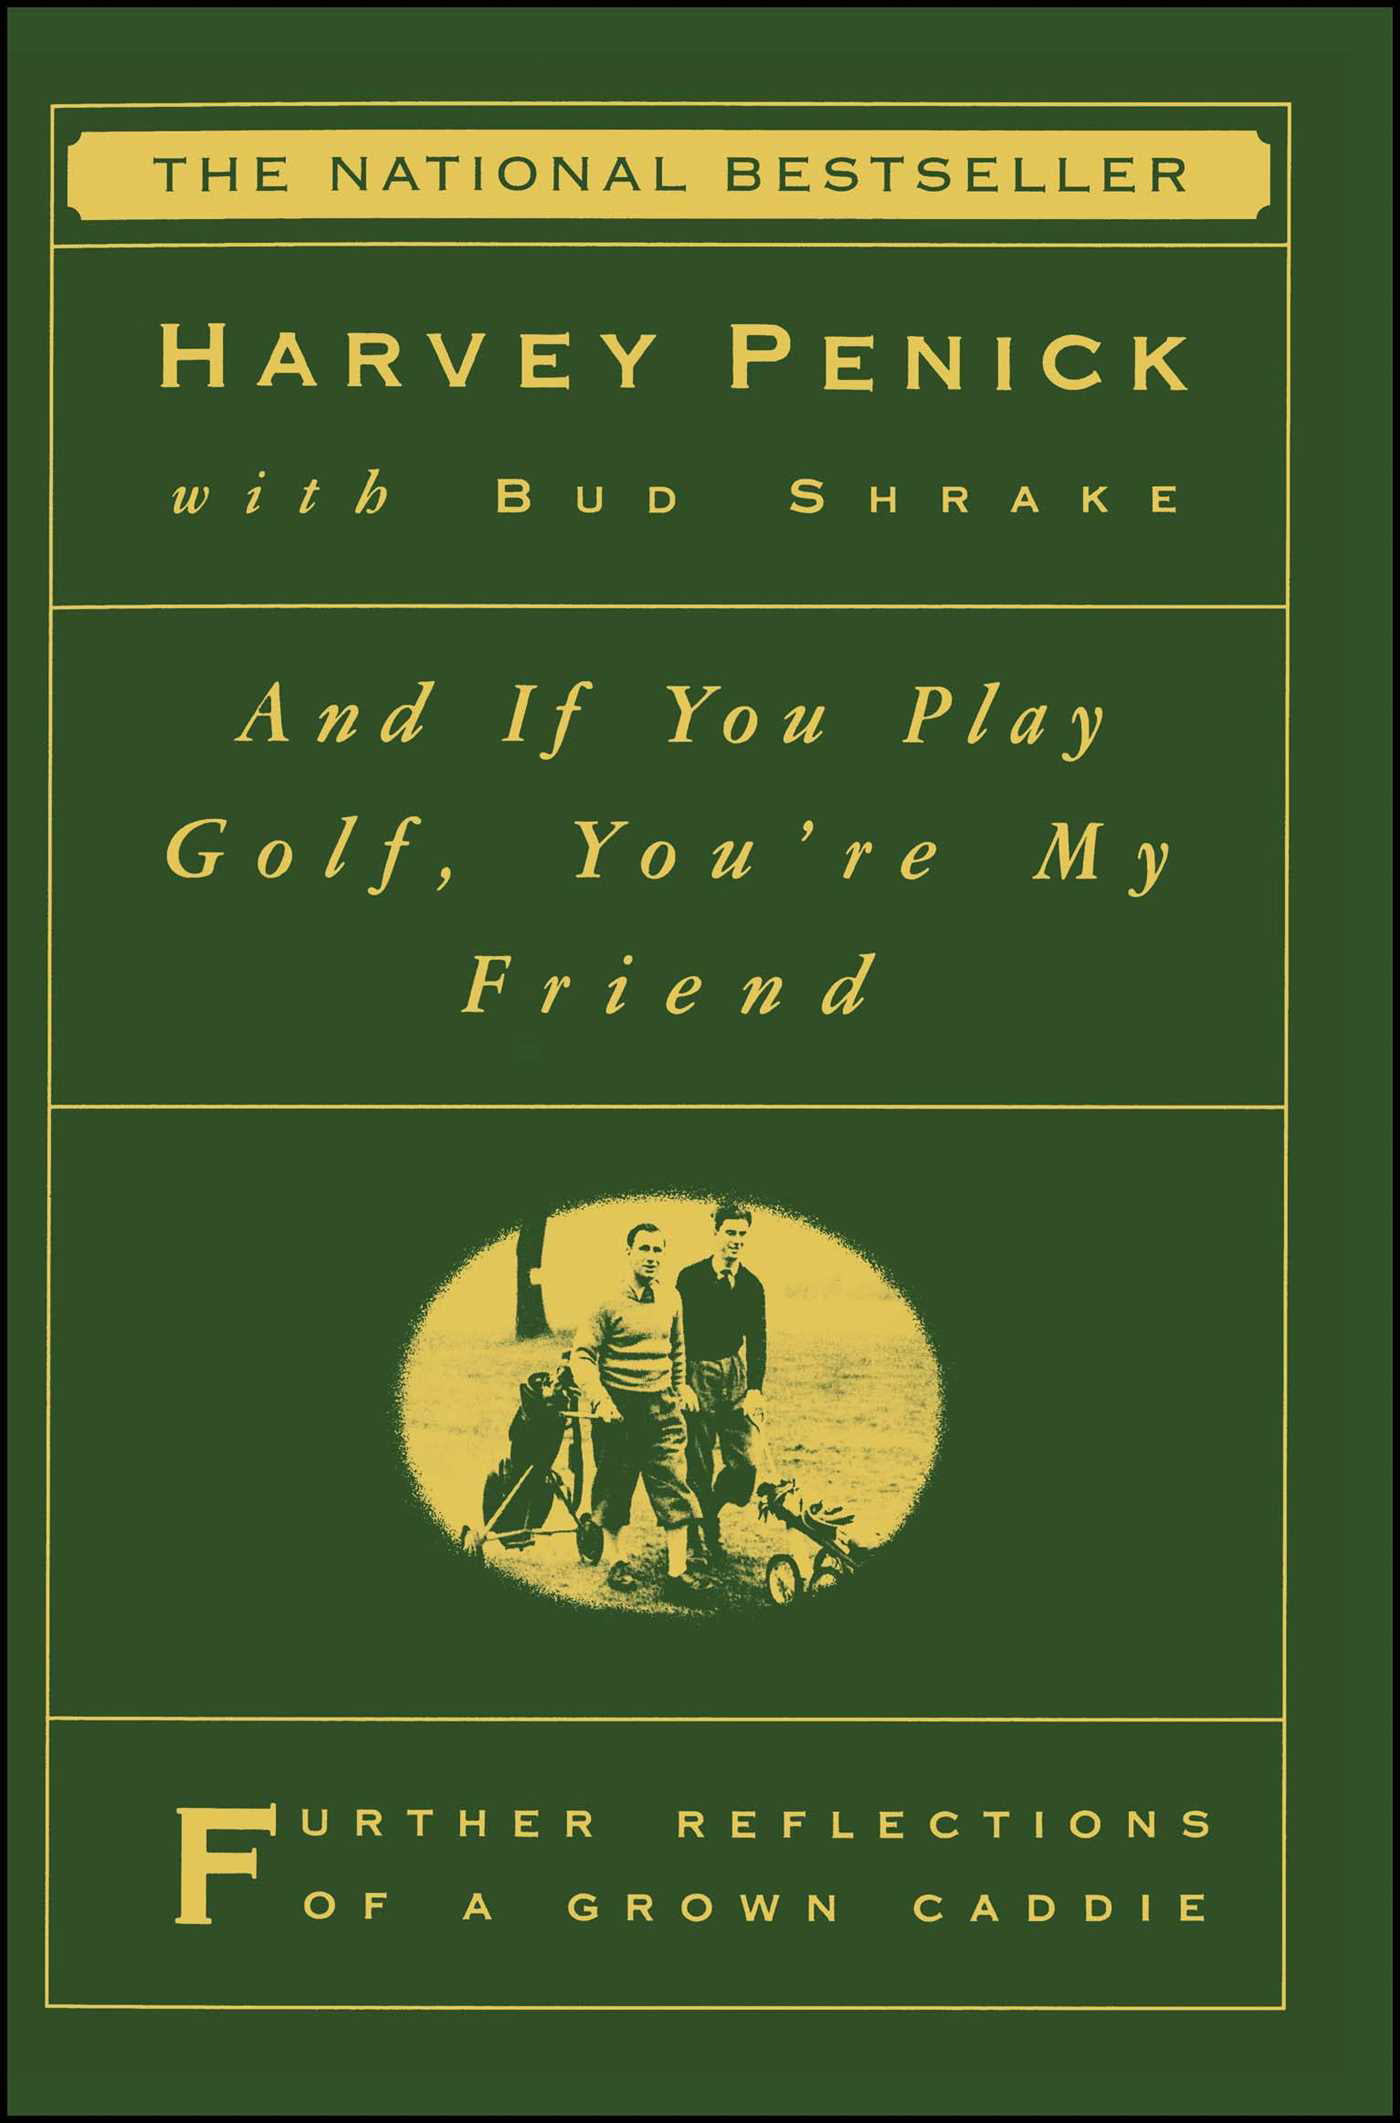 And If You Play Golf, You're My Friend : Reflections of a Grown Caddie (Paperback) - Walmart.com